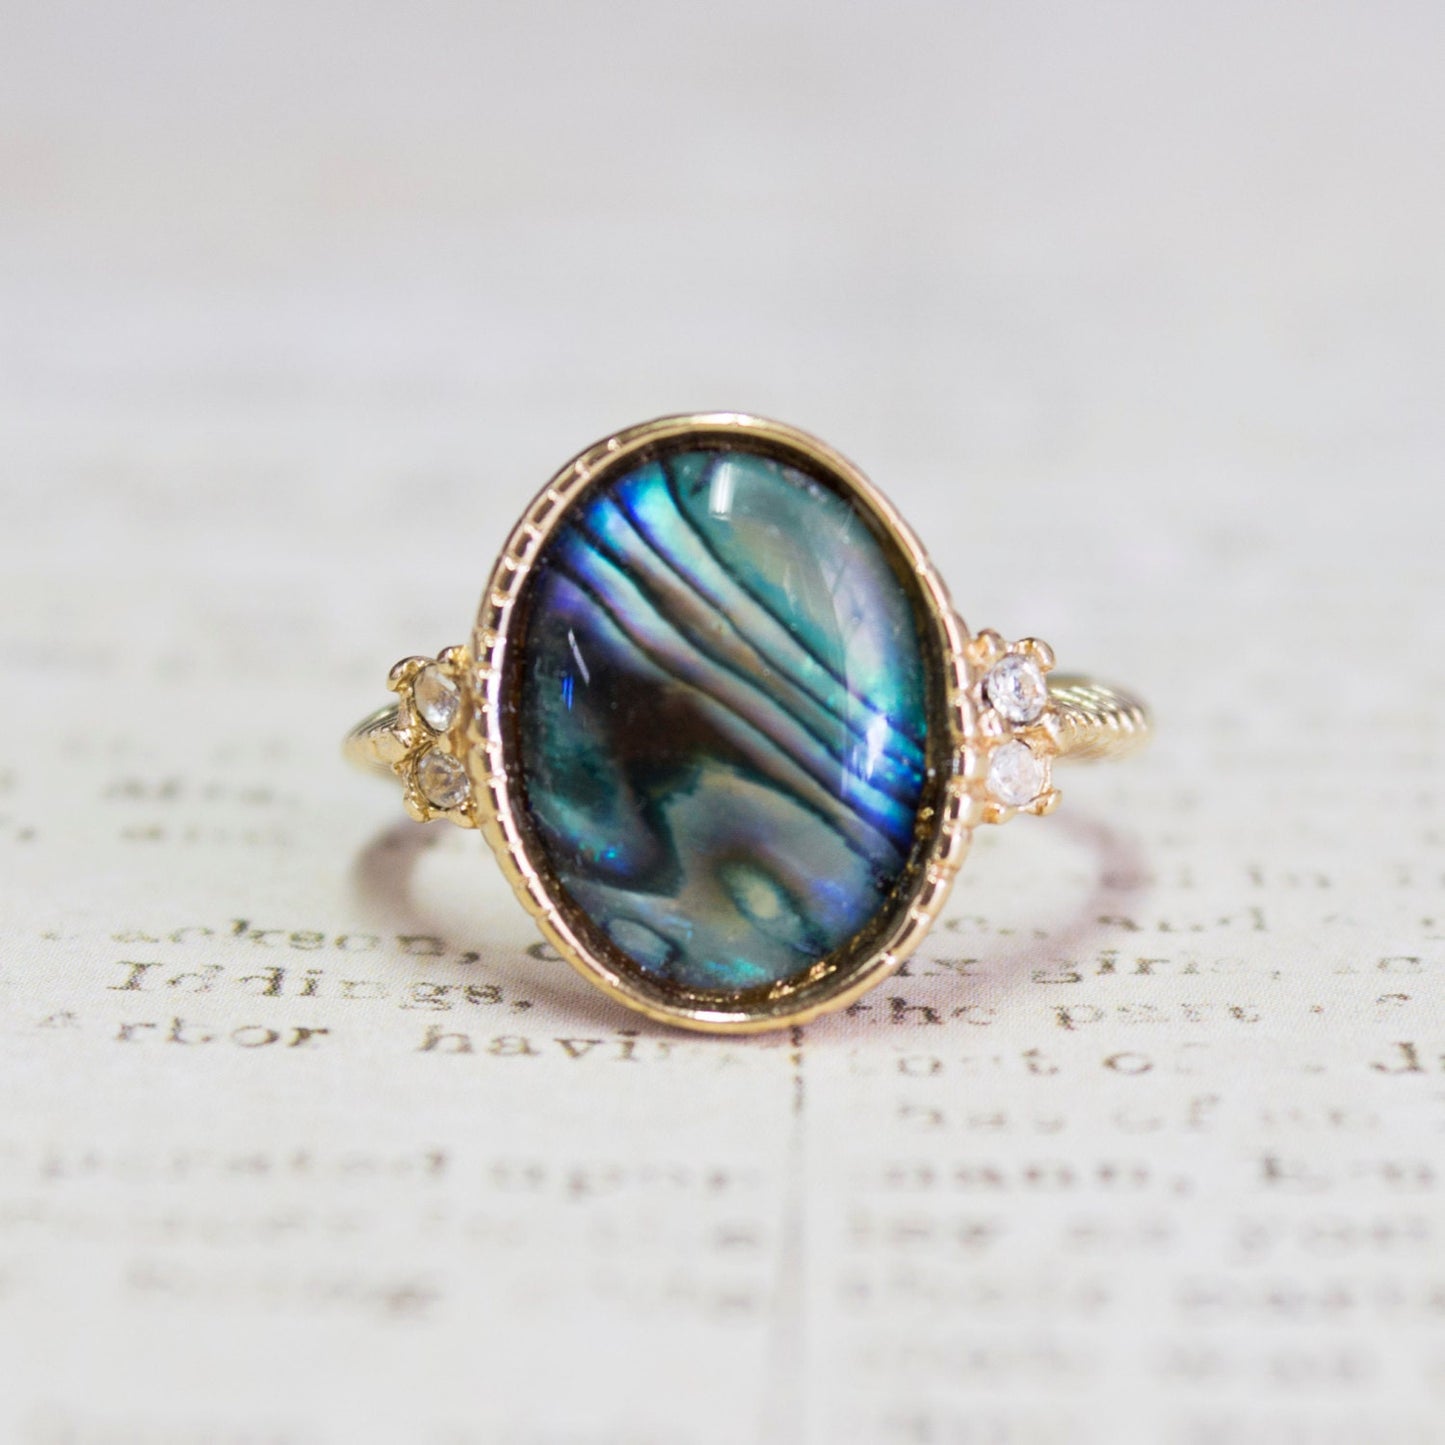 Vintage Ring Shimmering Blue Genuine Abalone Shell with Swarovski Crystal Accents 18k Gold Antique Woman #R1773